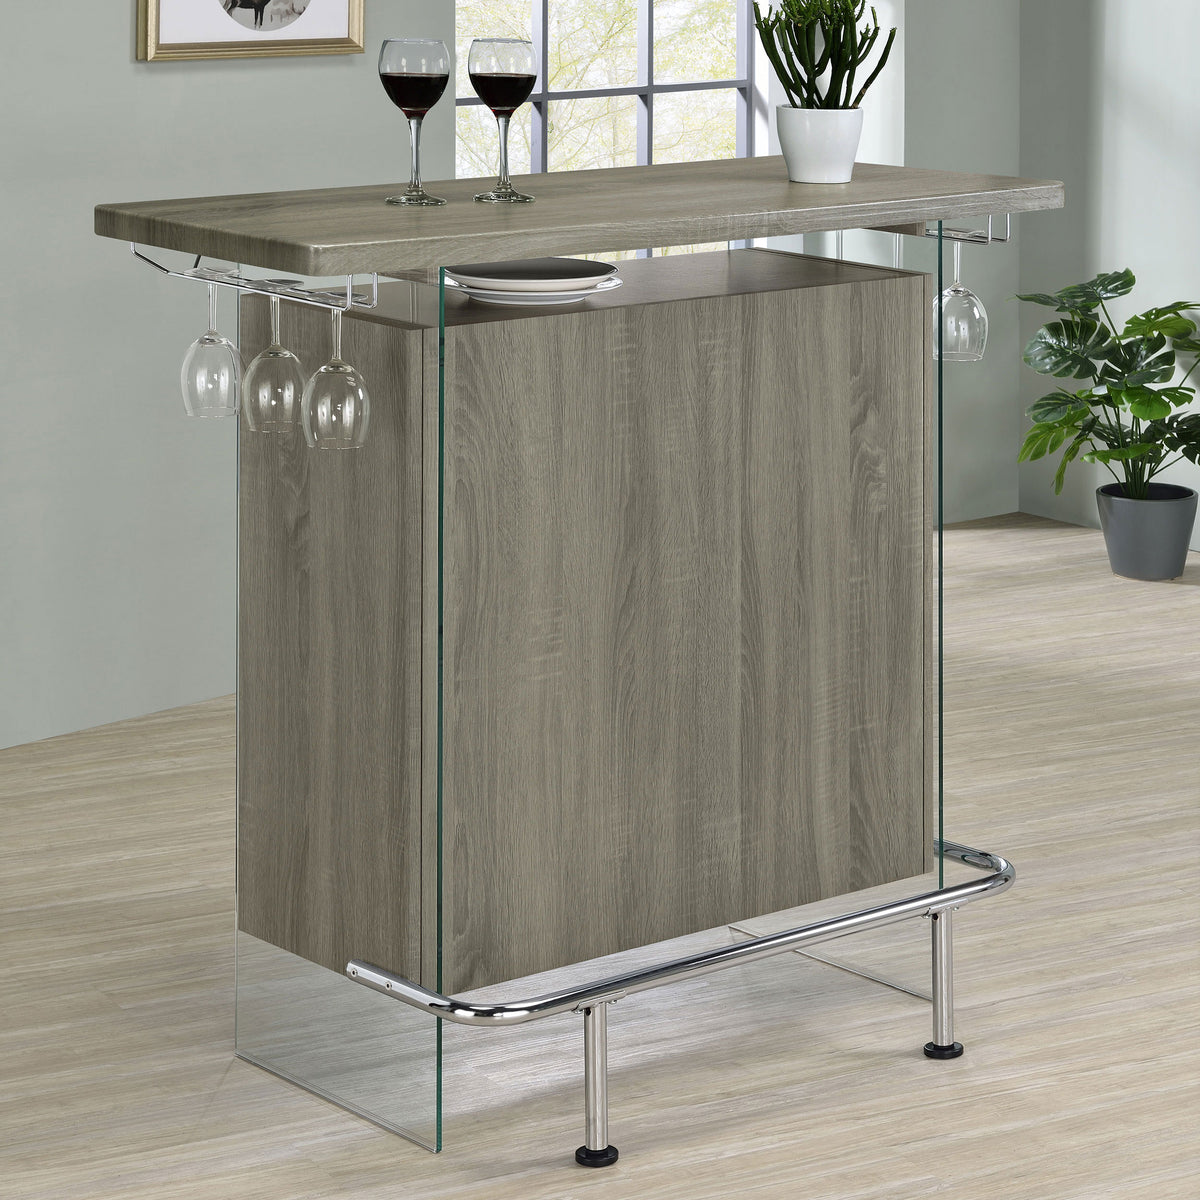 Acosta Rectangular Bar Unit with Footrest and Glass Side Panels  Las Vegas Furniture Stores